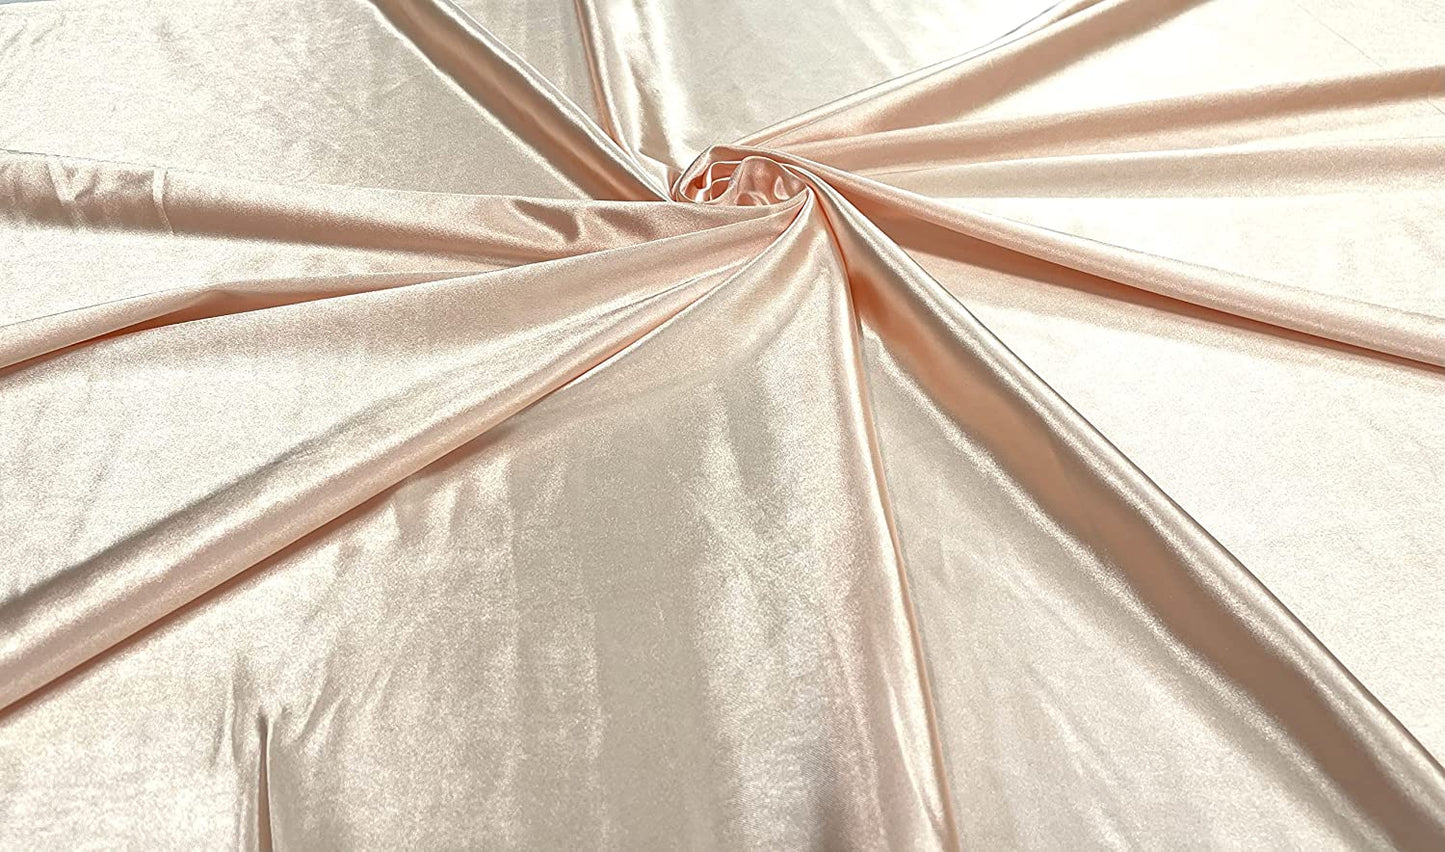 Deluxe Shiny Polyester Spandex Stretch Fabric (1 Yard, Beige)